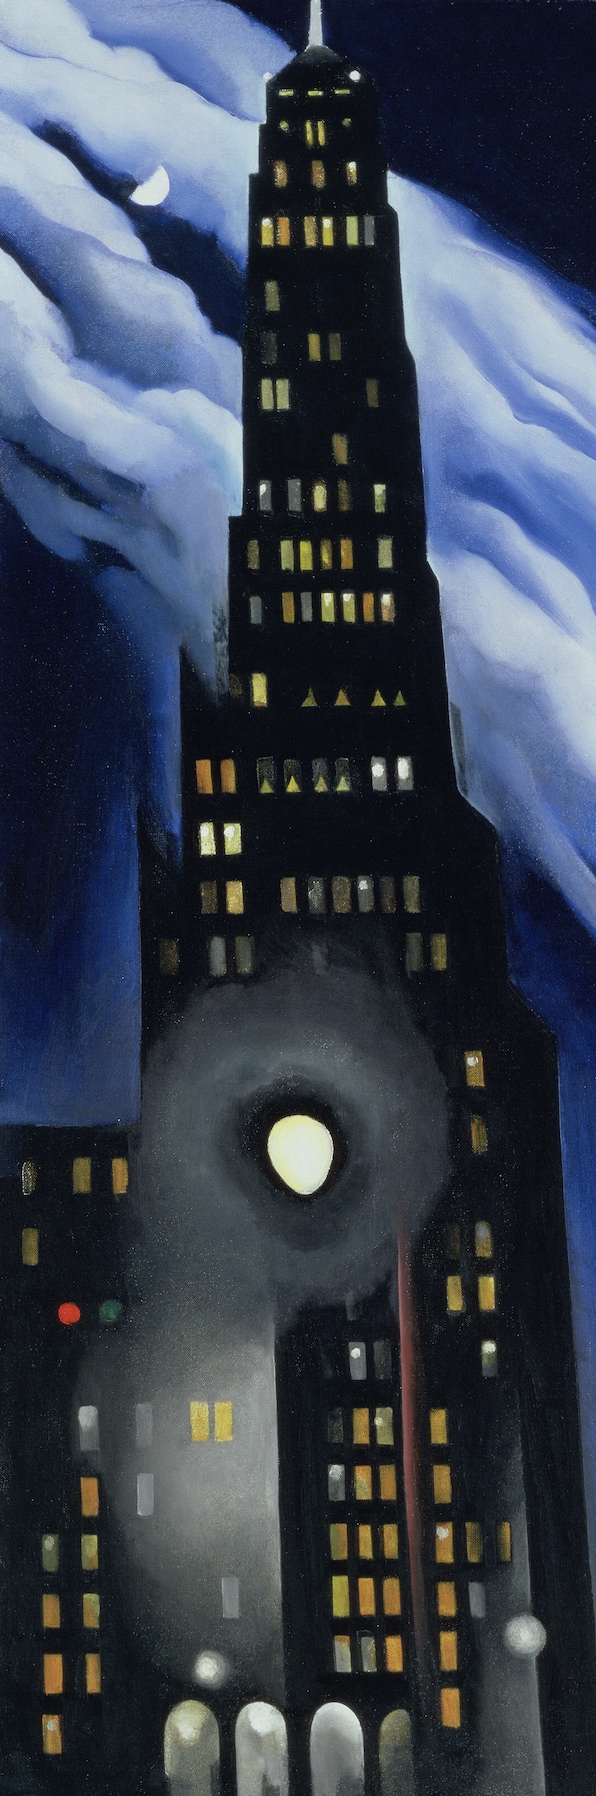 Georgia O’Keeffe, Ritz Tower, 1928. Oil on canvas. 40 ¼ x 14 in. Museum Purchase. © Georgia O'Keeffe Museum, 2018.14.1.